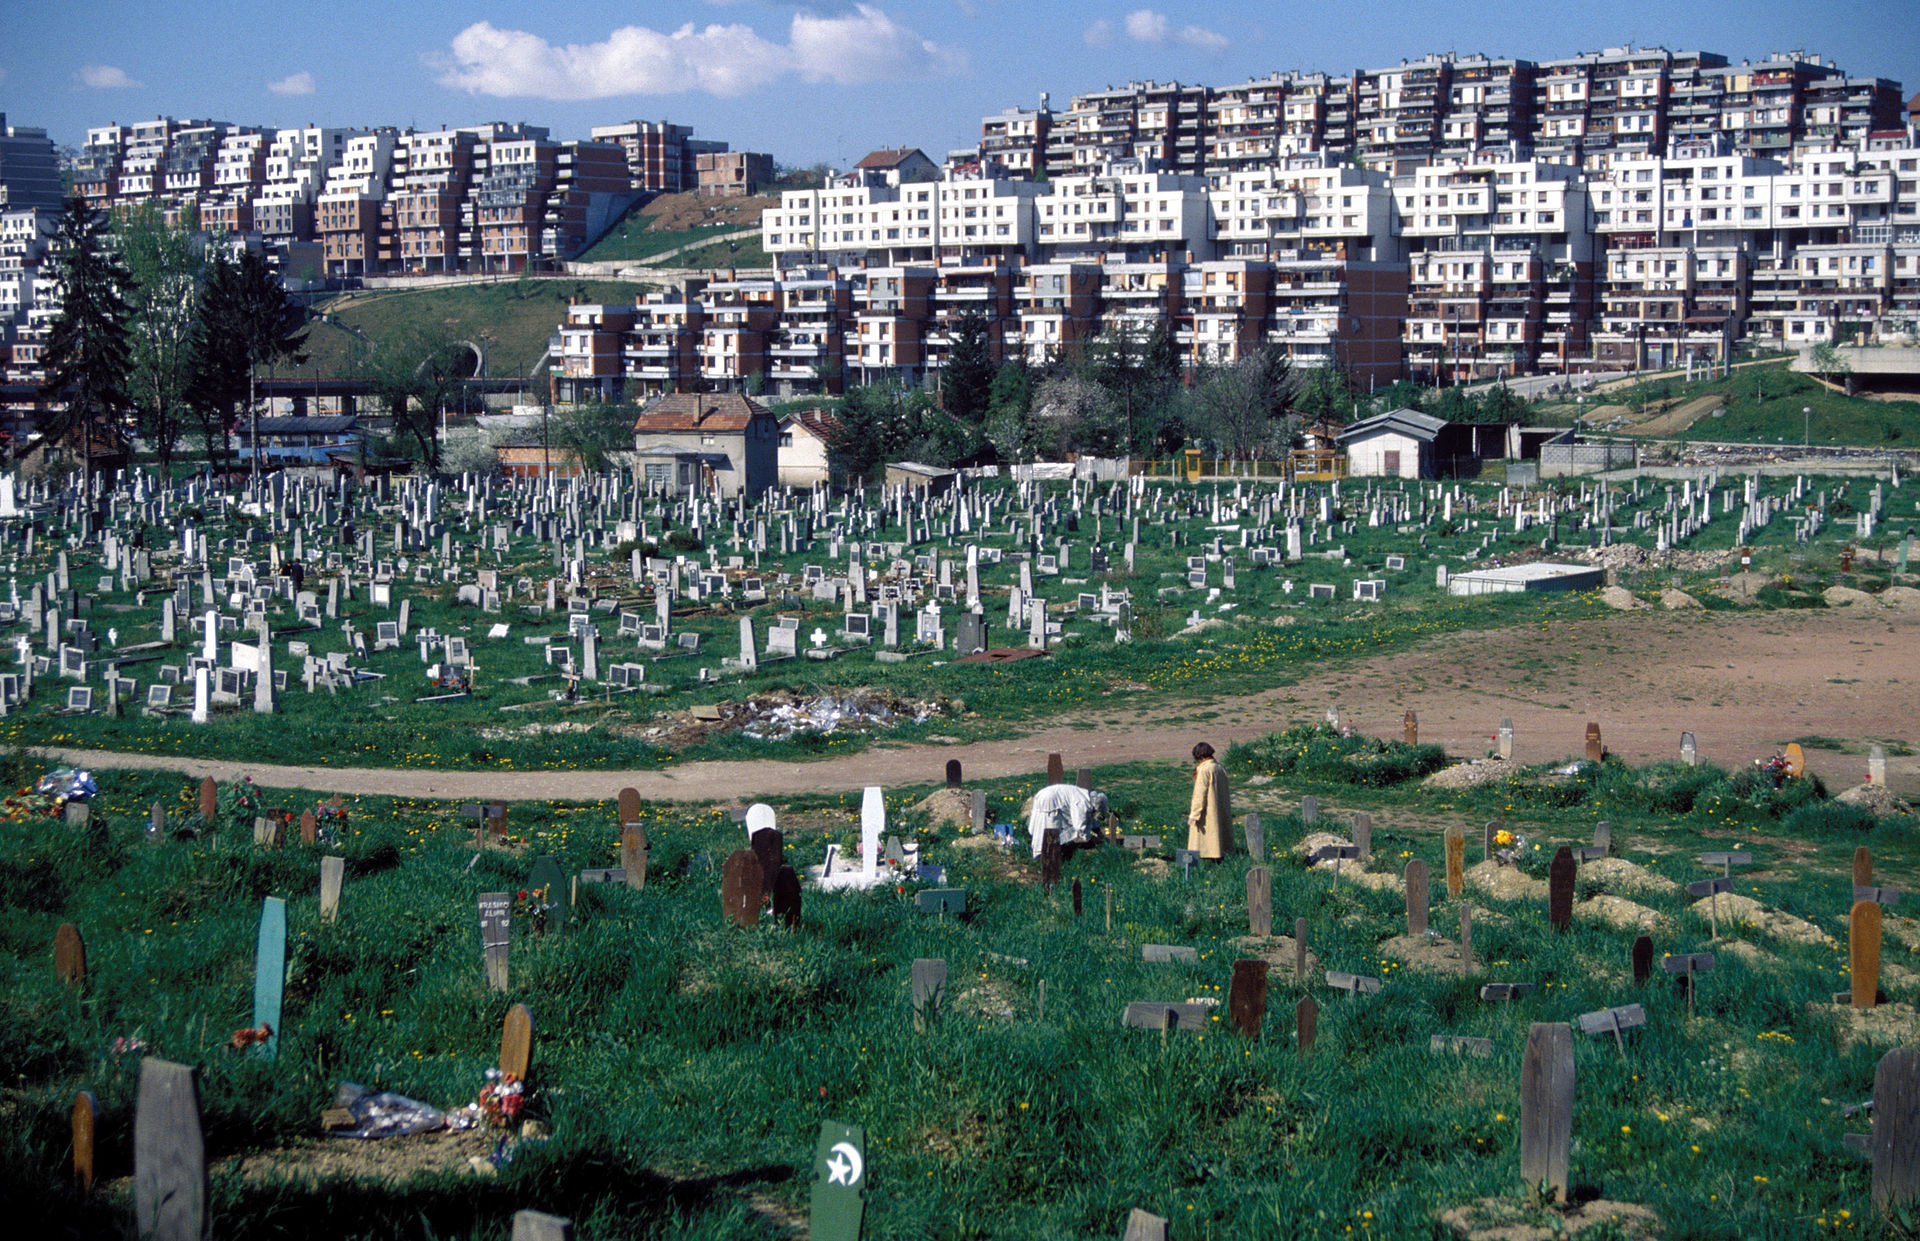 A cemetery for 12,000 killed during the Bosnian War was visible from the Koševo City Stadium ©Wikipedia